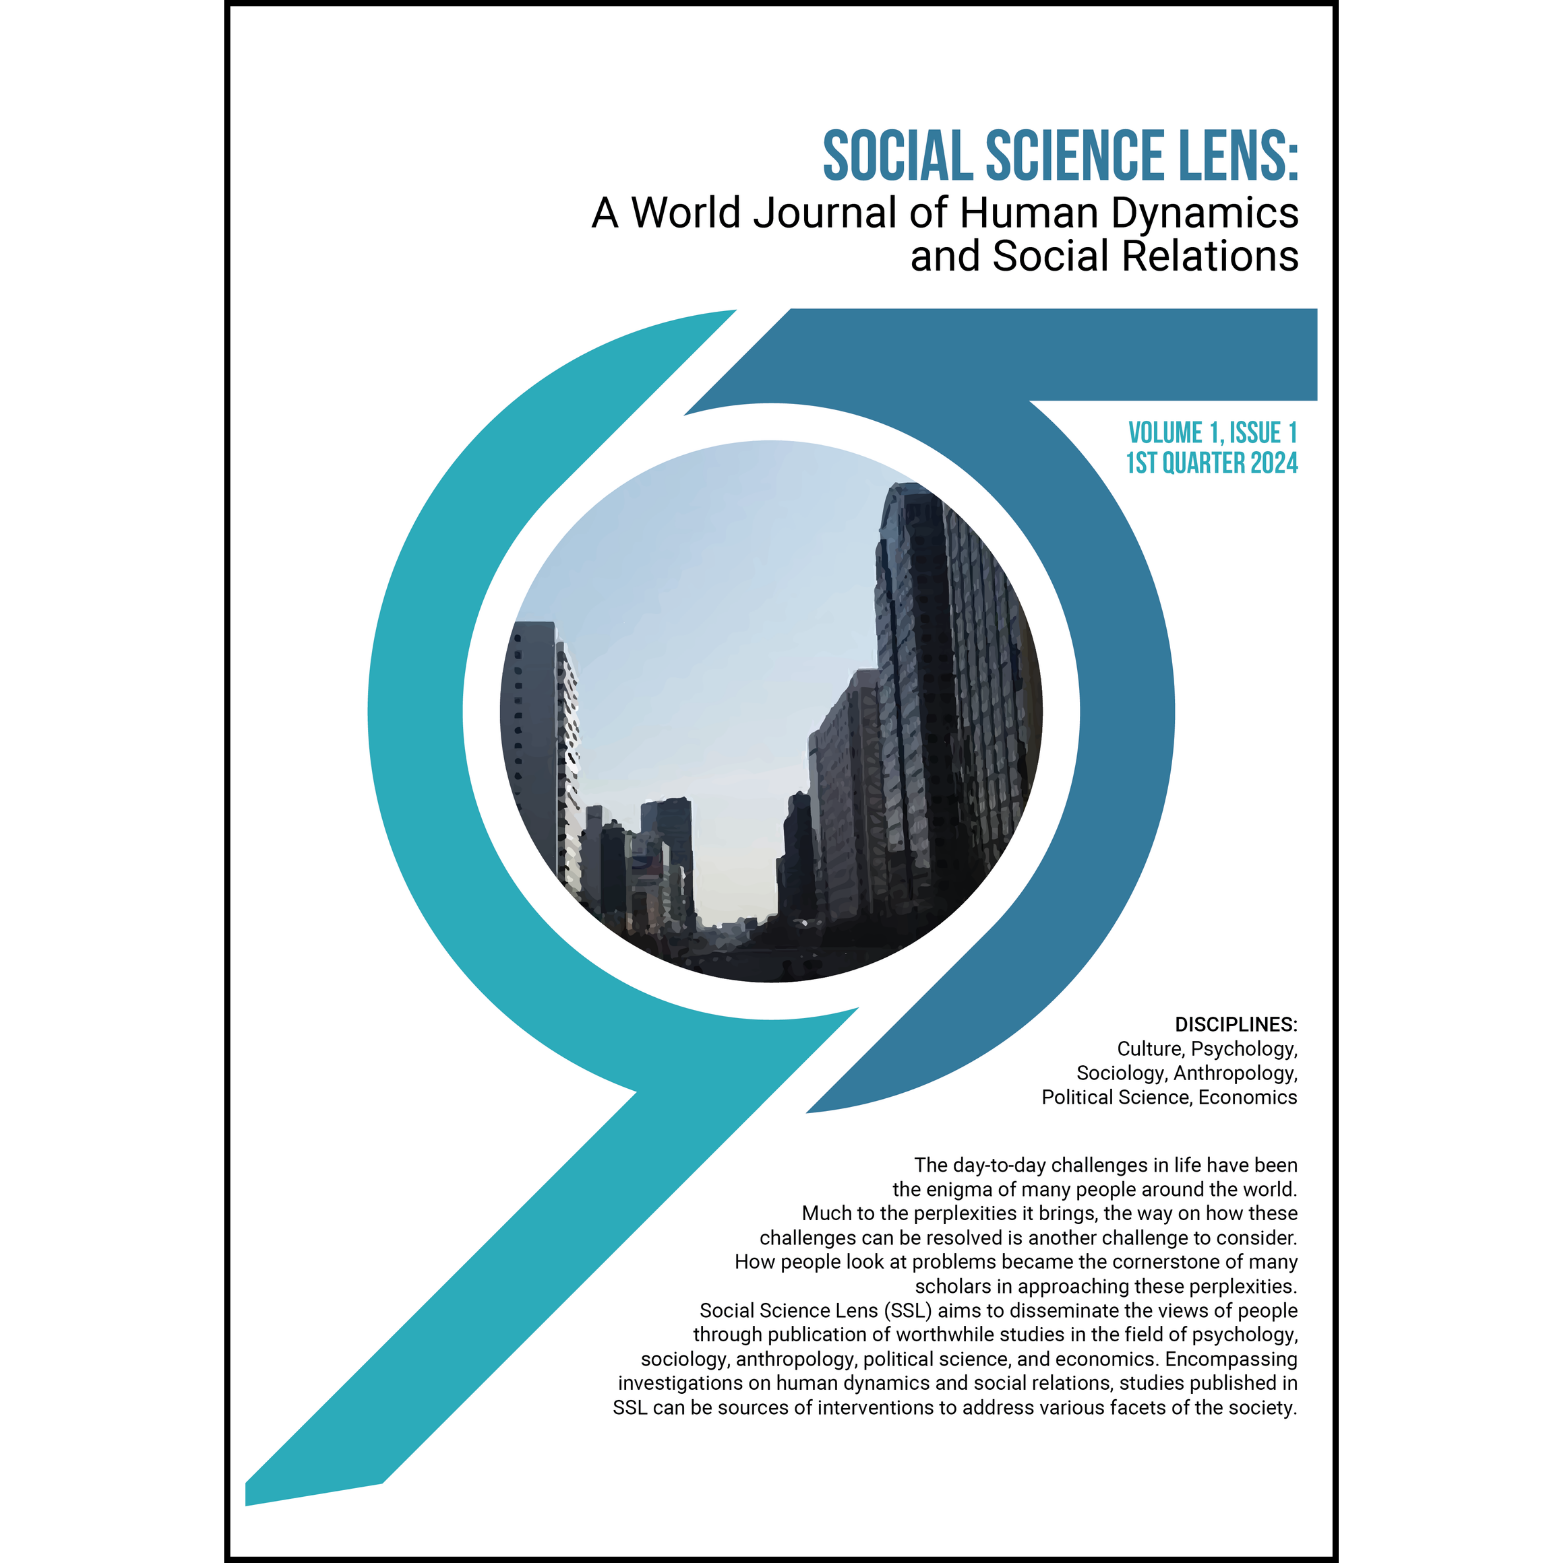 Social Science Lens: A World Journal of Human Dynamics and Social Relations